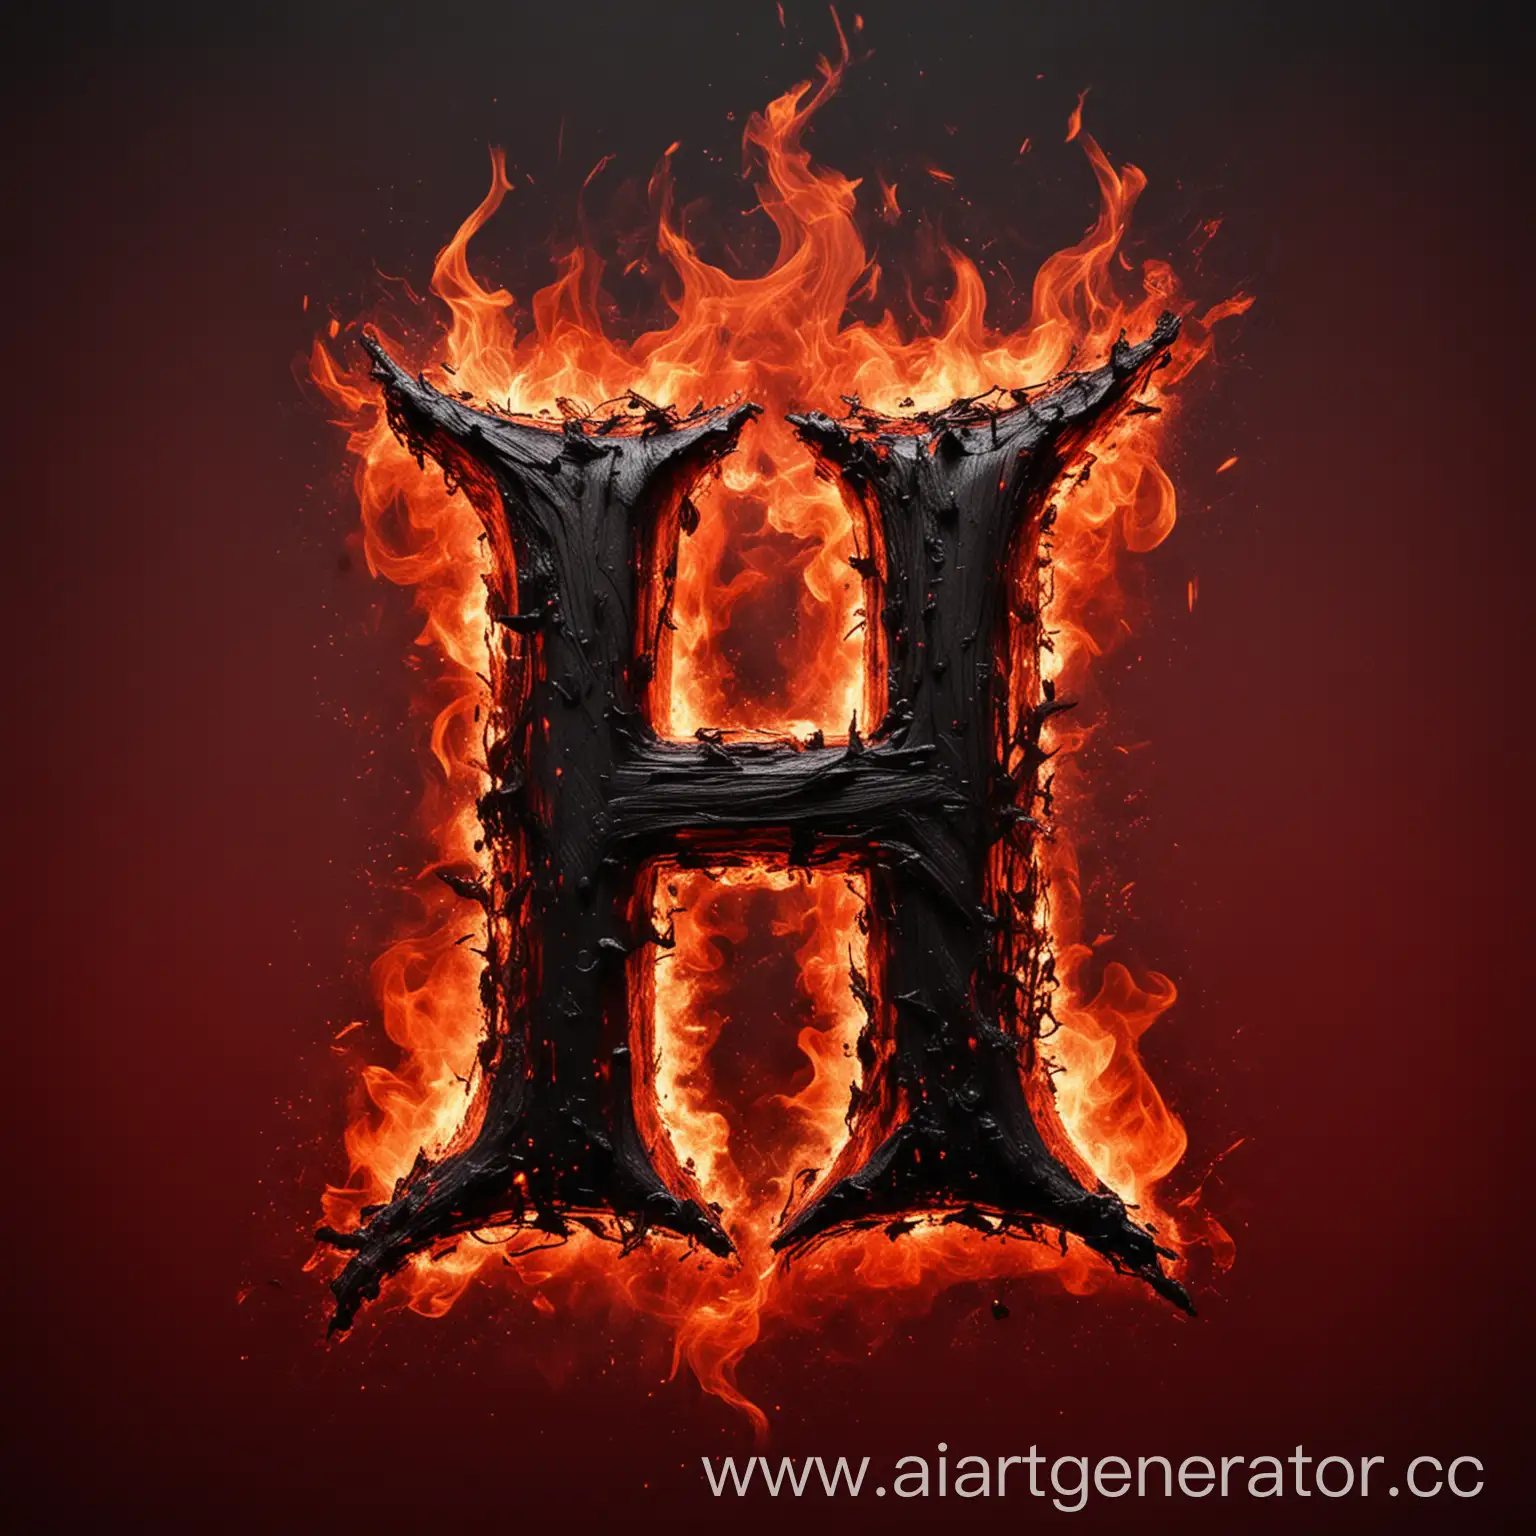 Fiery-Chaos-with-Letter-H-on-BlackRed-Background